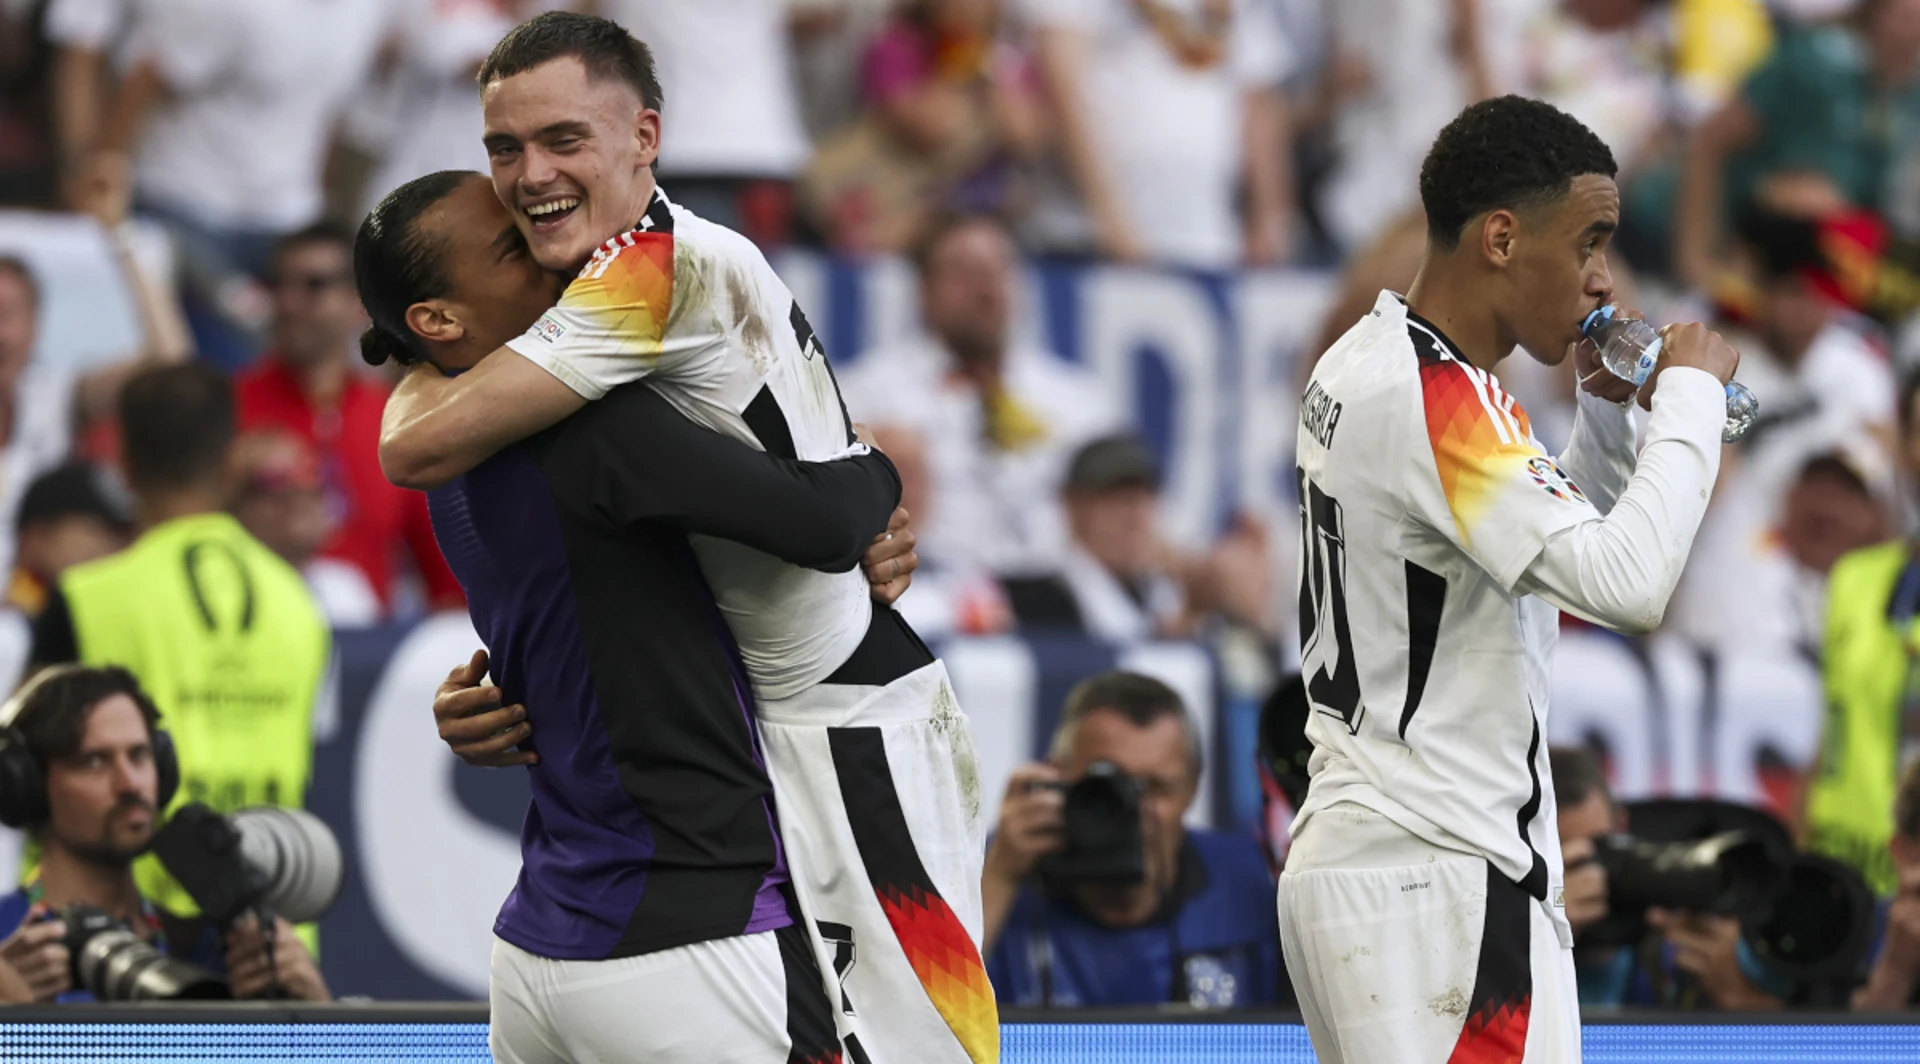 Instead of summer fairytale, Germany got first chapter of promising story